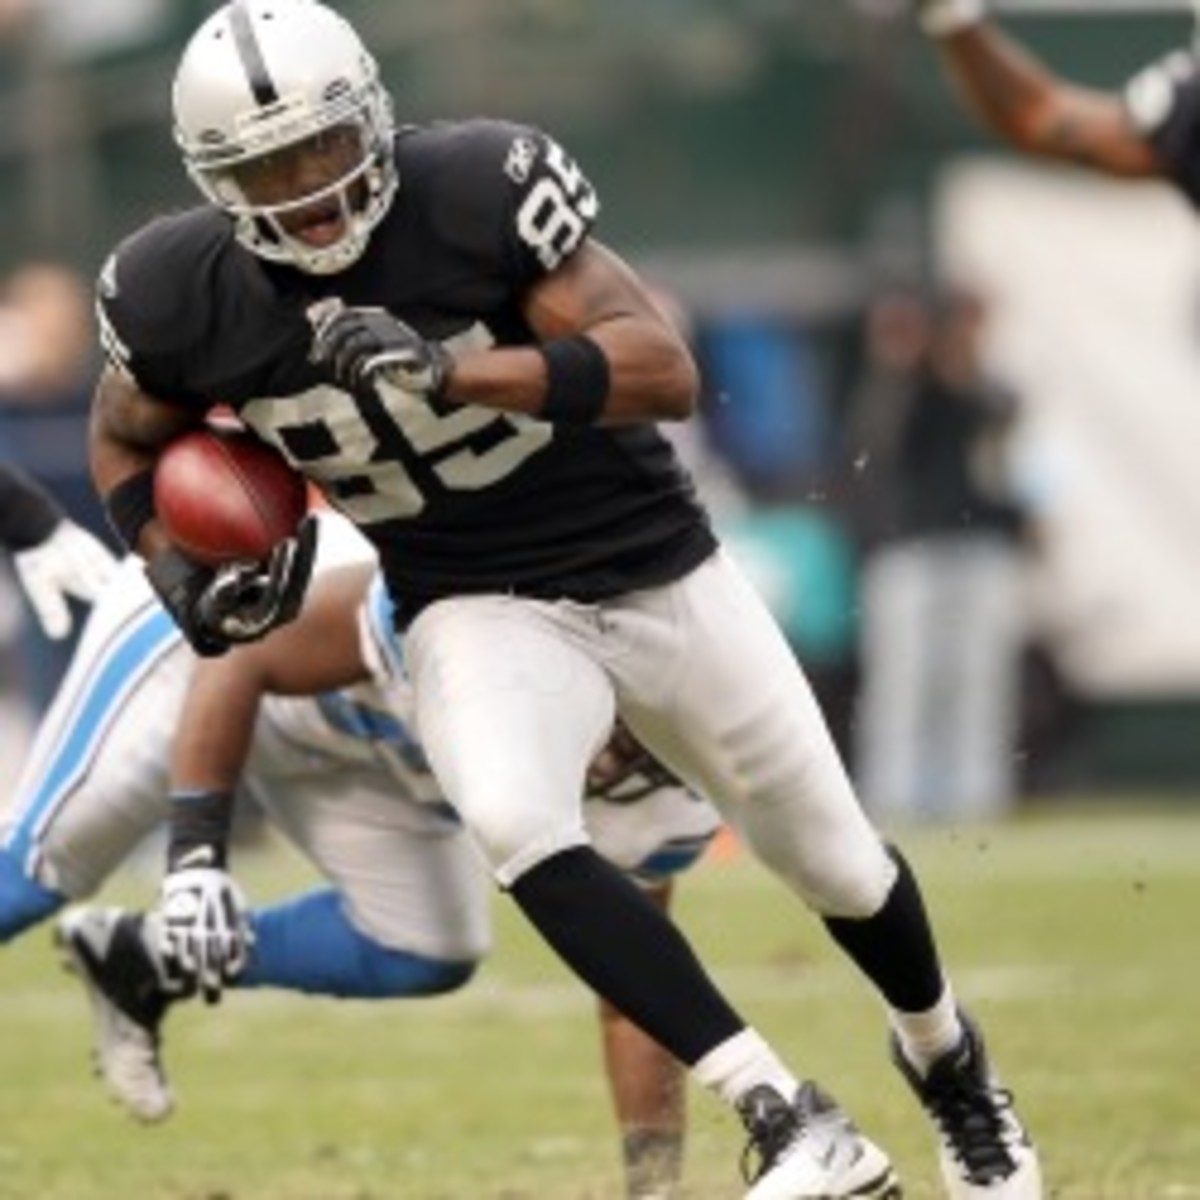 The Raiders give up on former first-rounder Darrius Heyward-Bey. (Ezra Shaw/Getty Images)